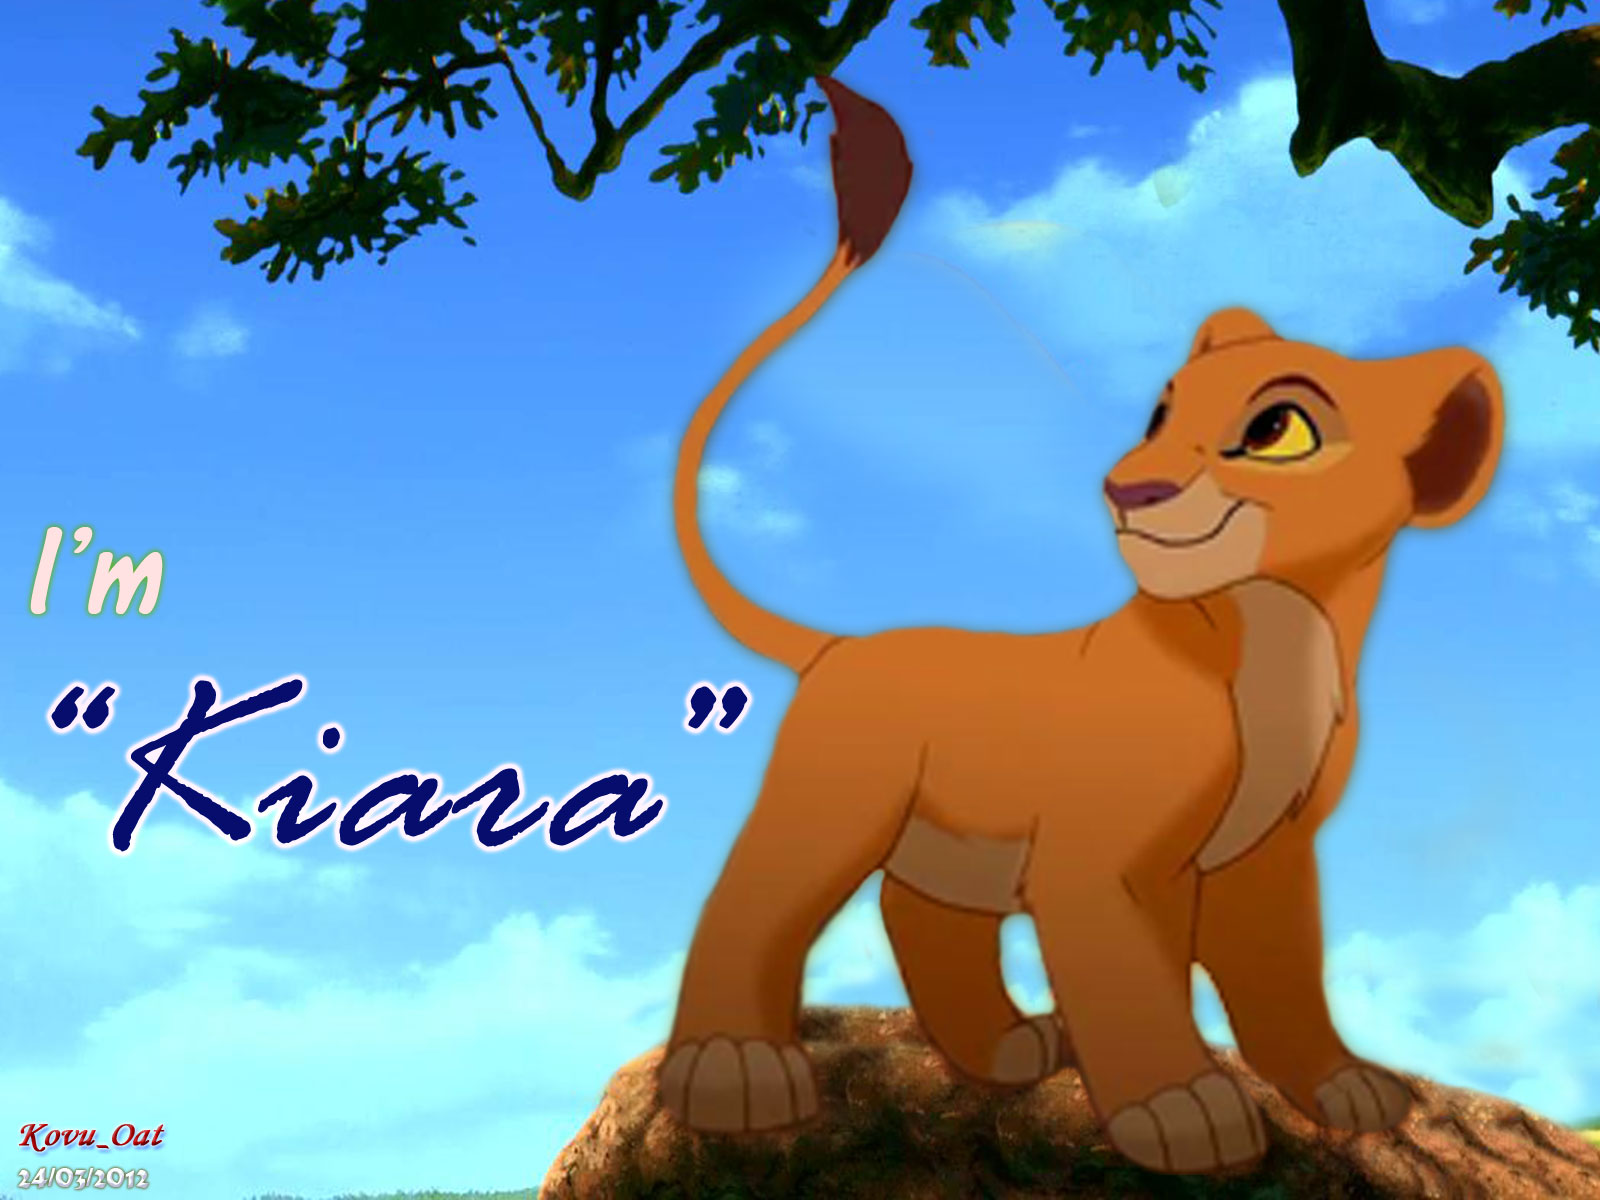 The Lion King Young Kiara 壁紙 Hd ライオン キング 壁紙 ファンポップ Page 3